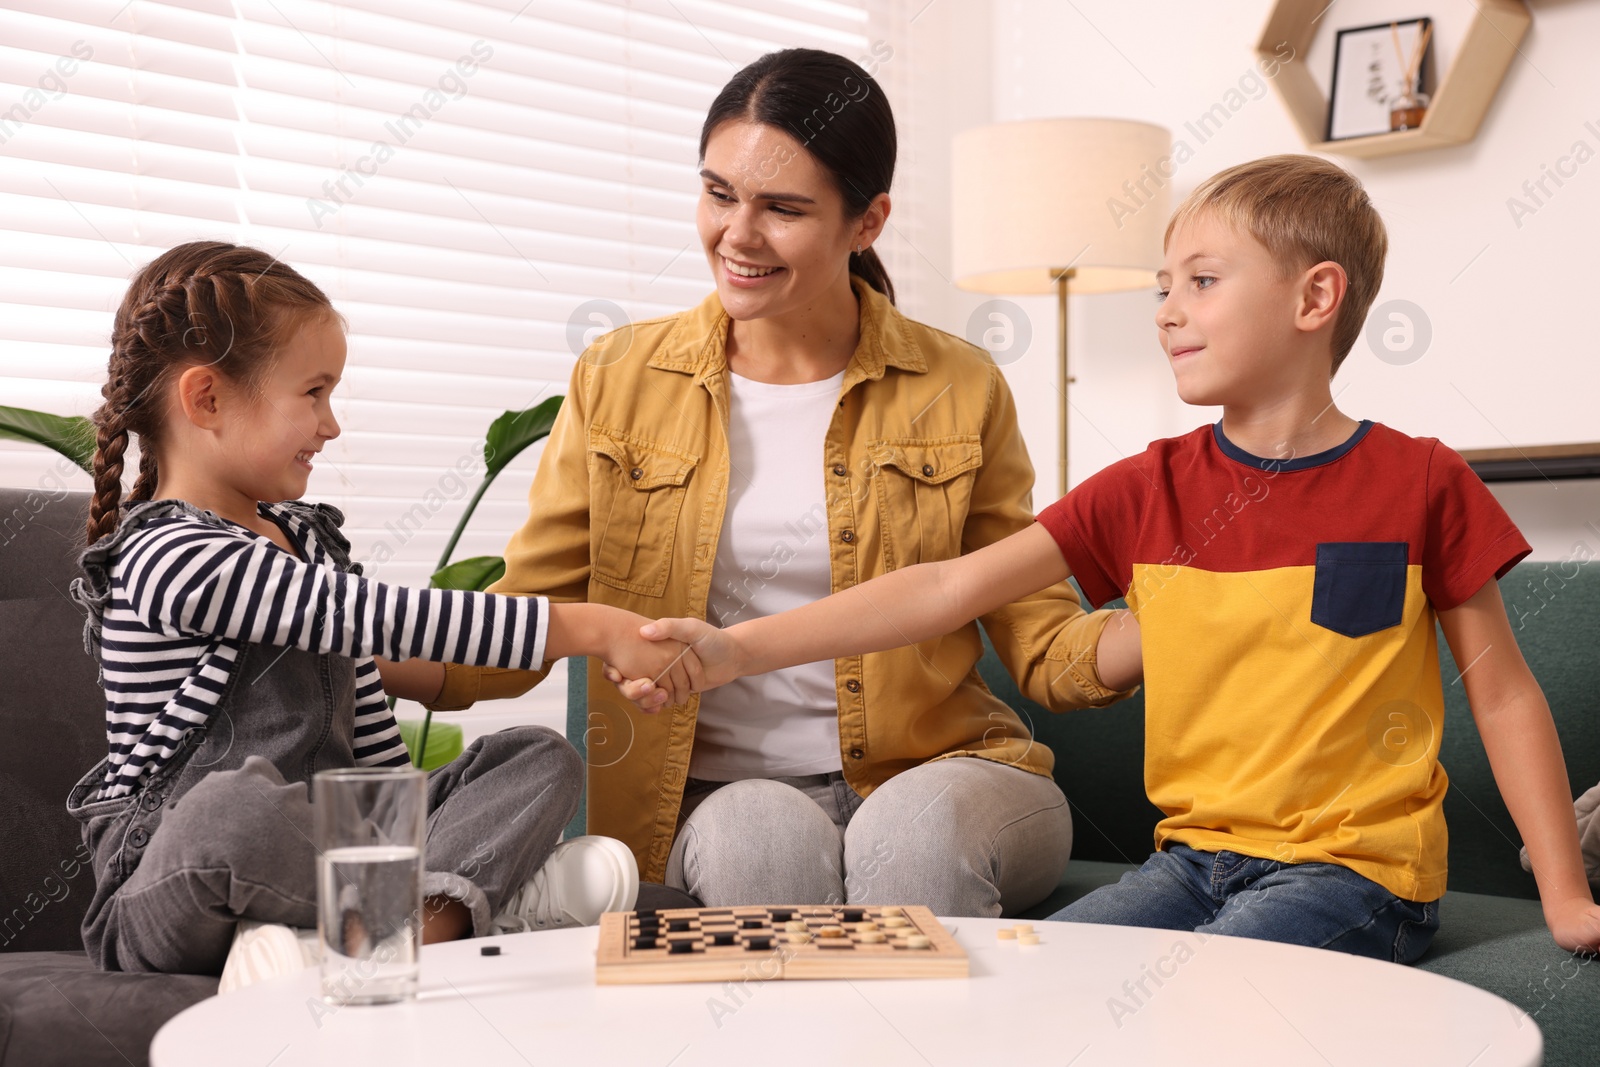 Photo of Family playing checkers at coffee table in room. Children shaking hands after game